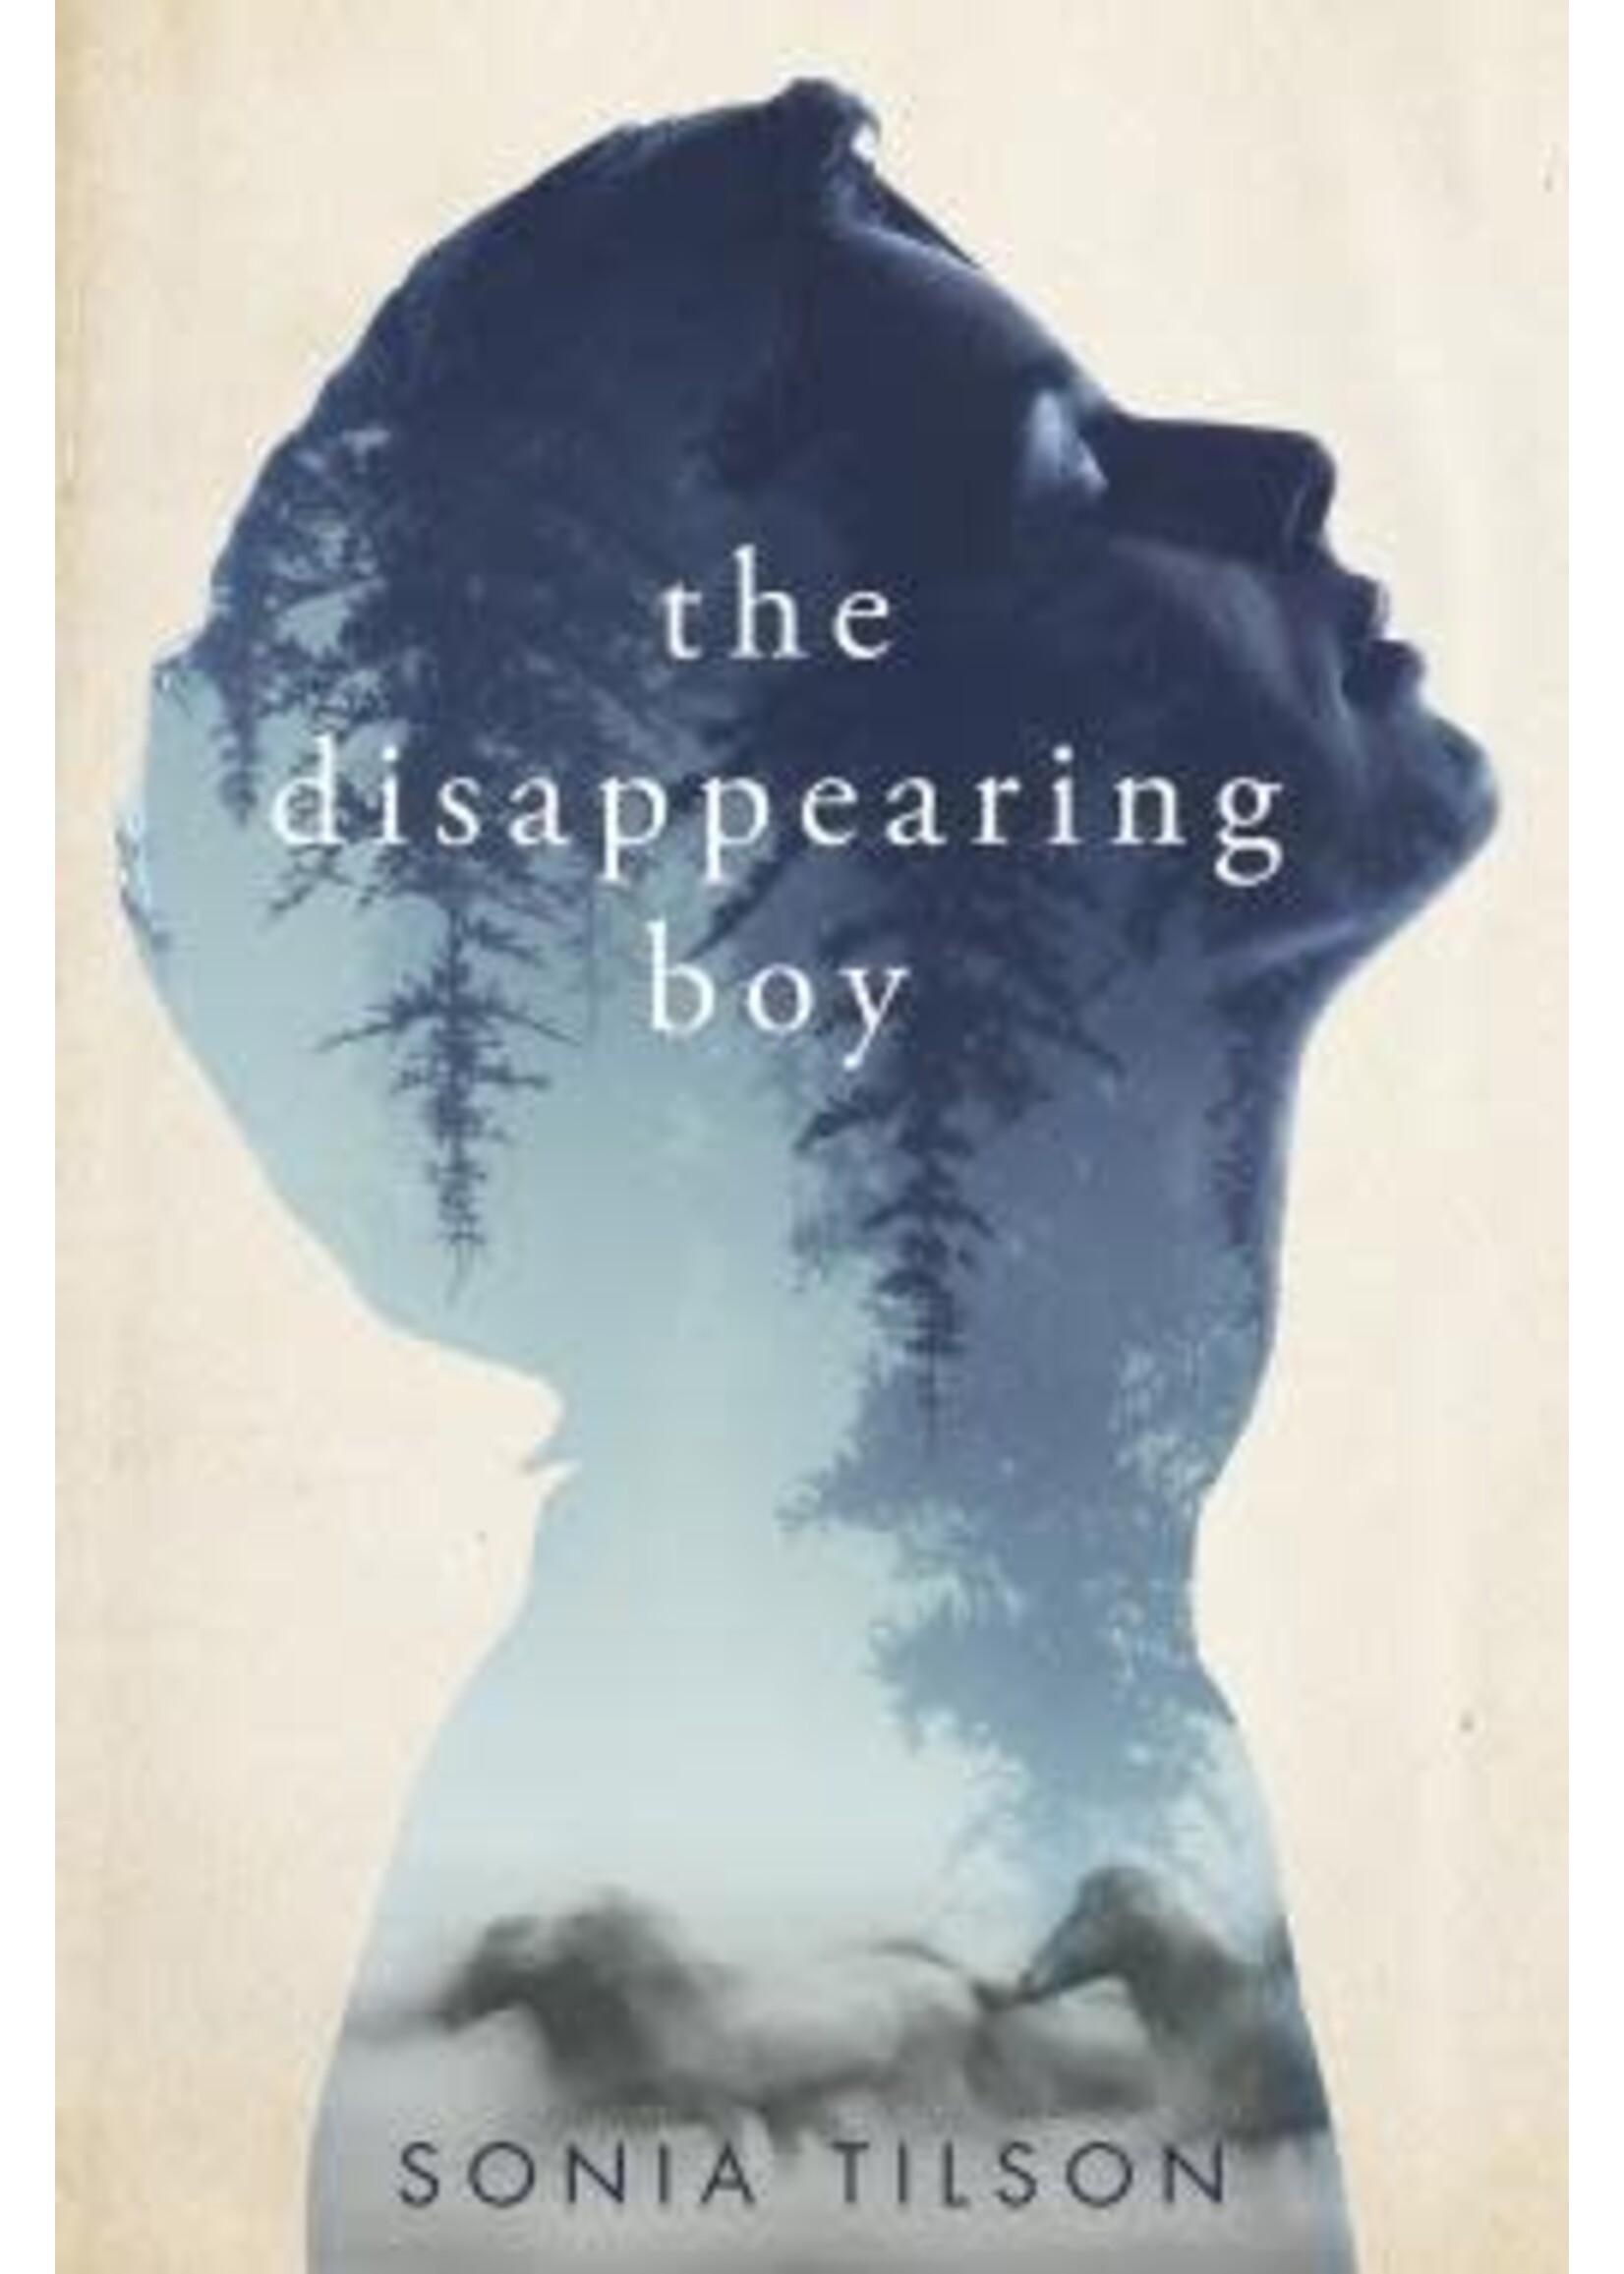 The Disappearing Boy by Sonia Tilson